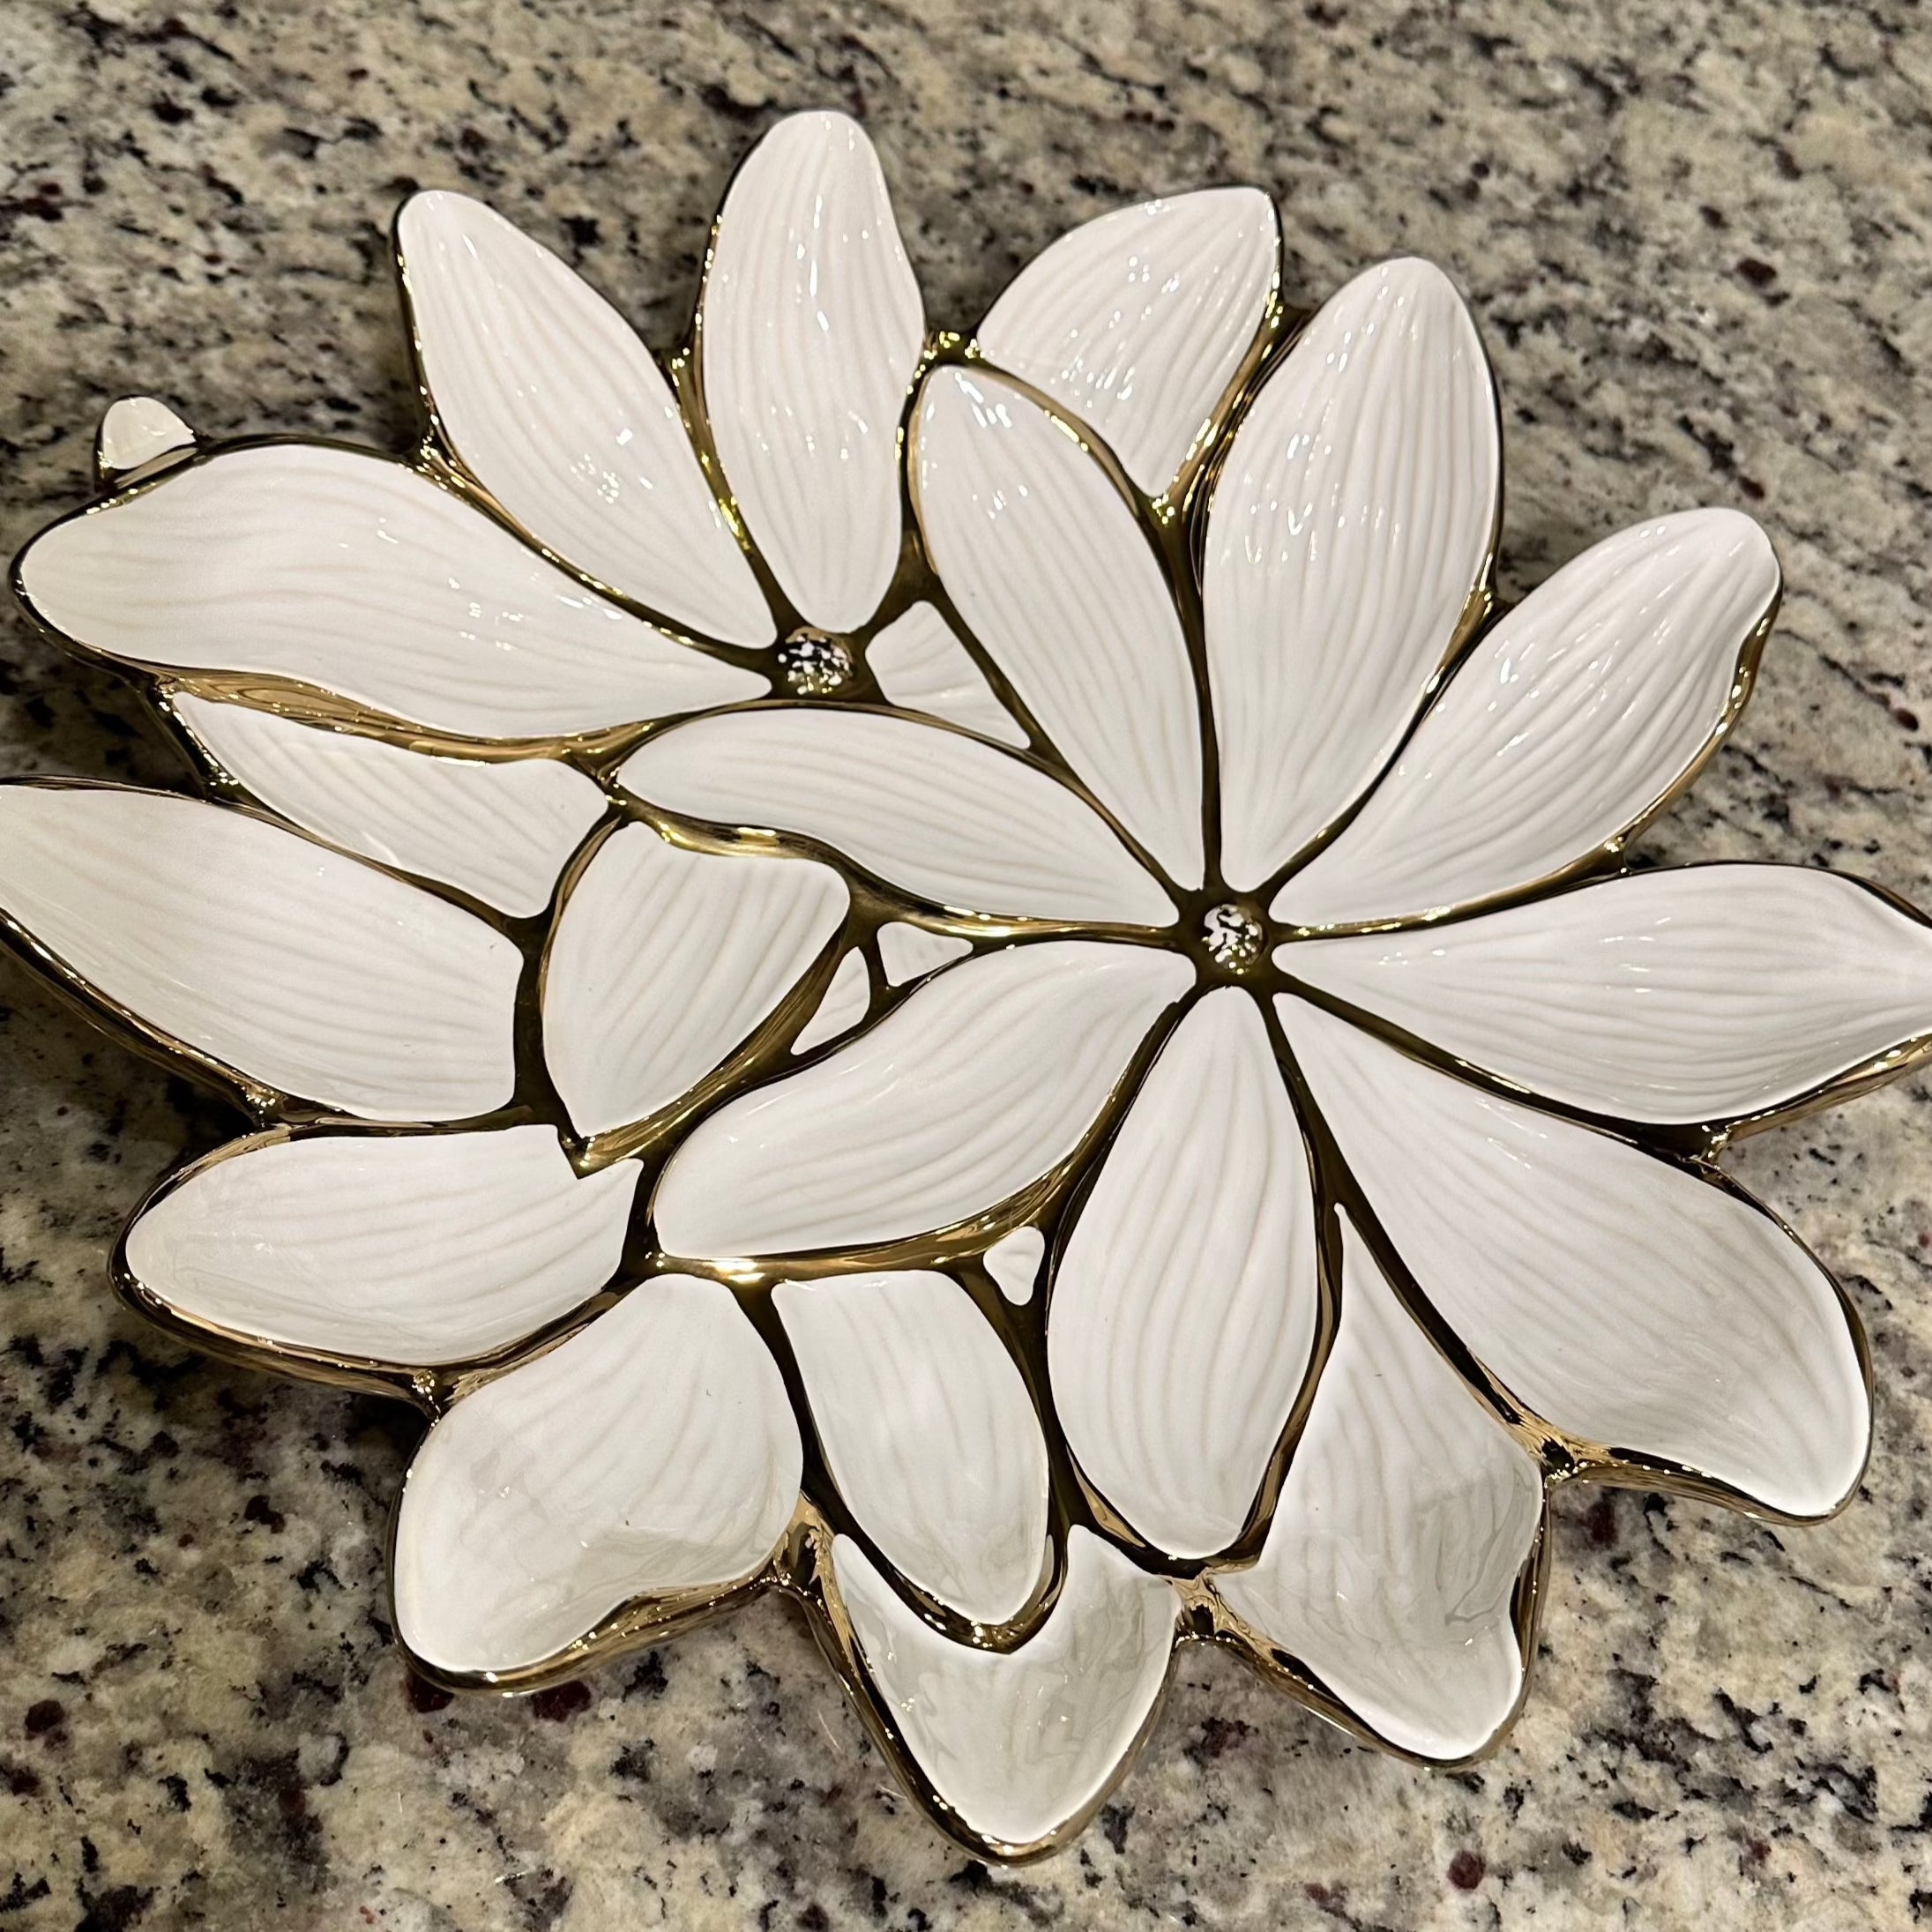 White Porcelain Flower Plate with Gold Edge (11.75")